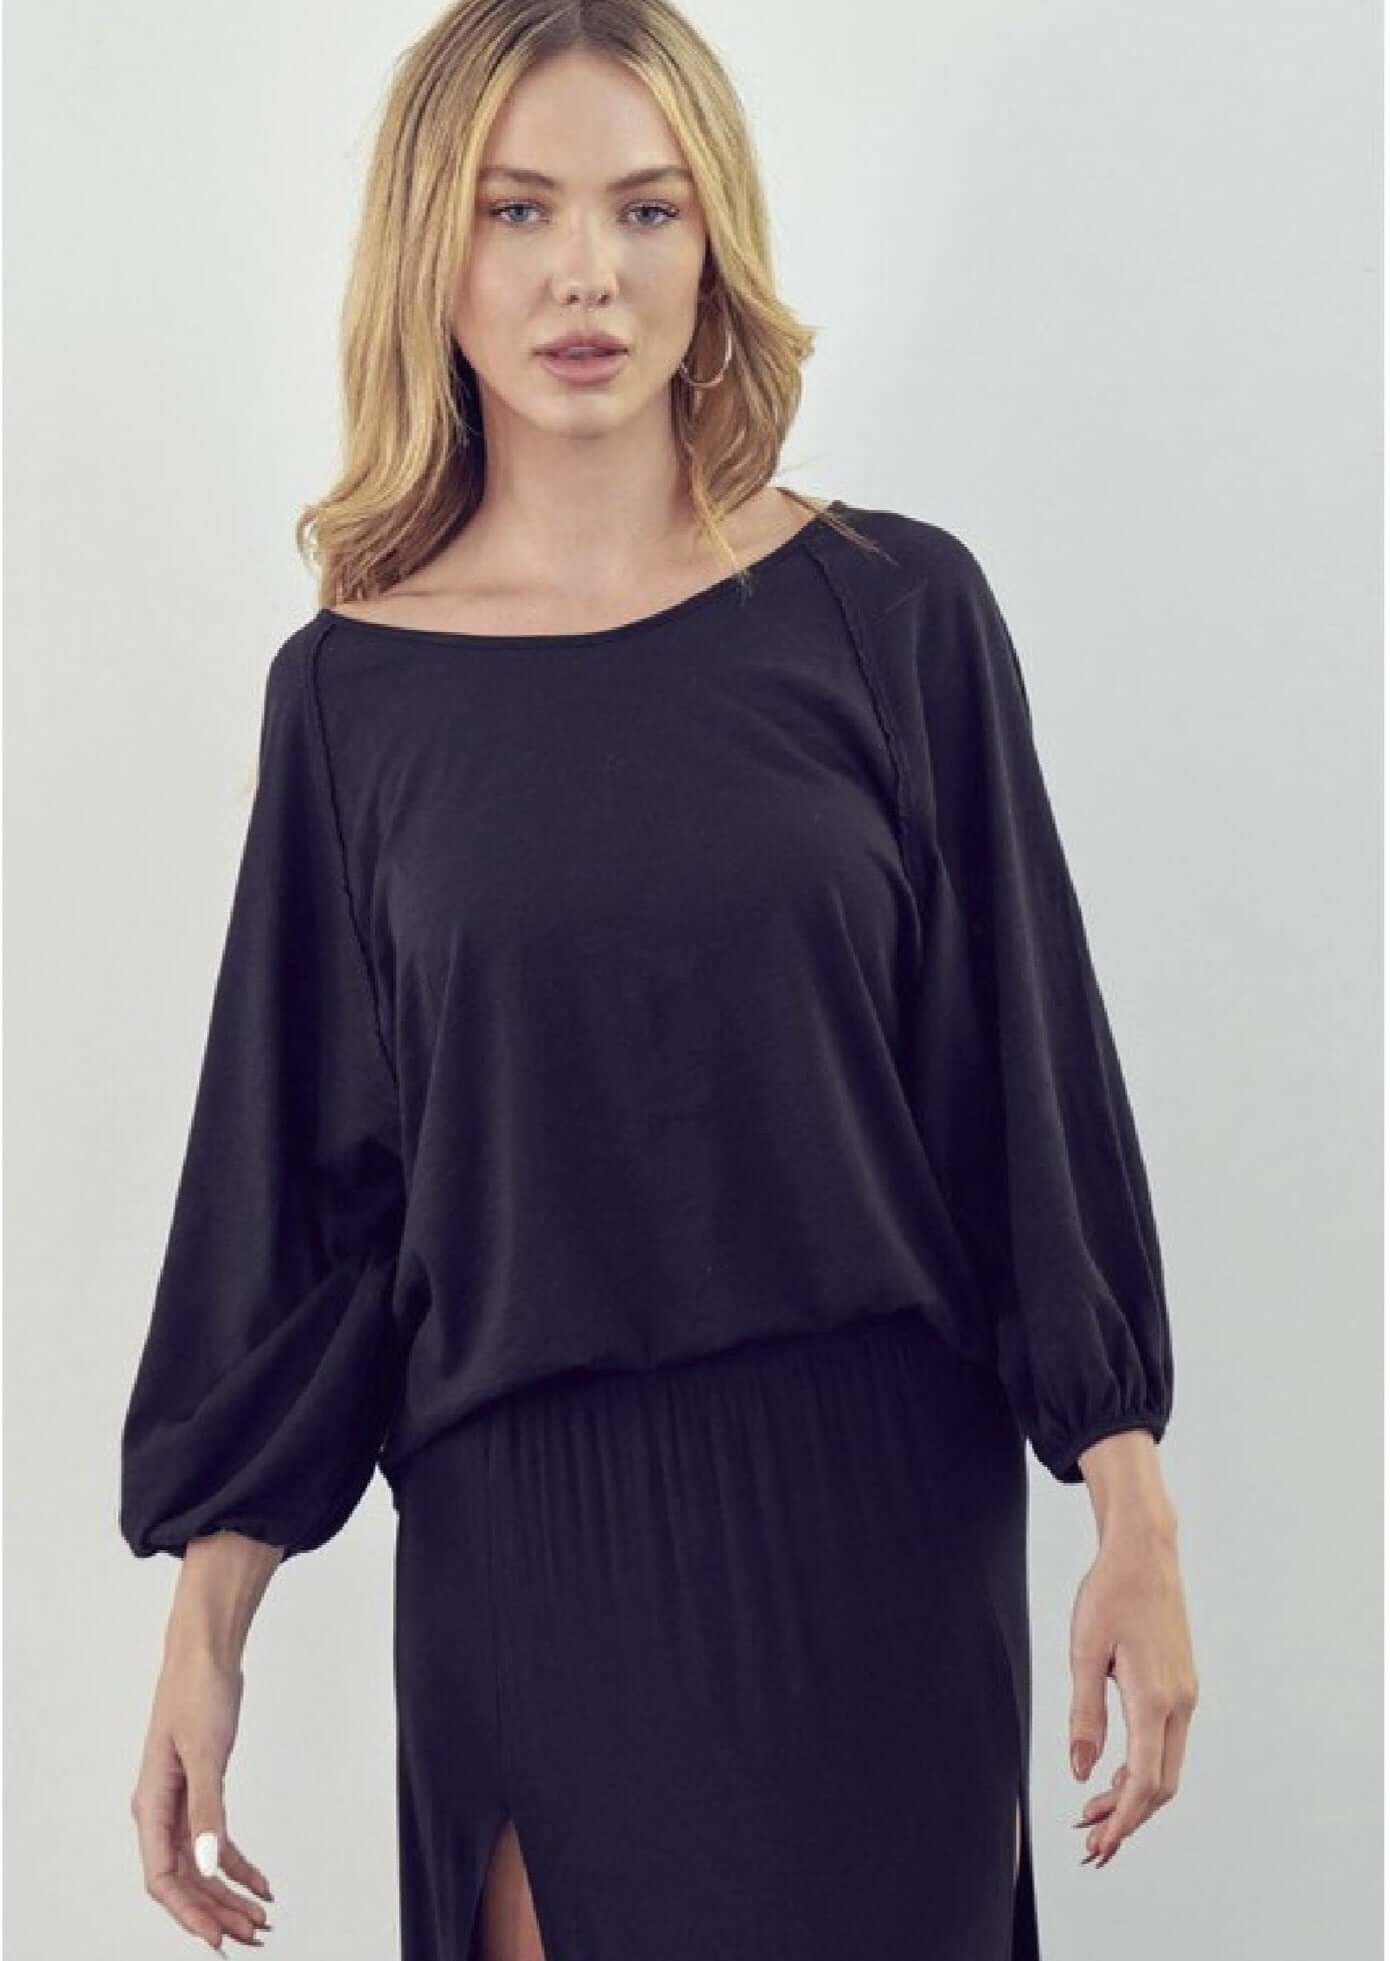 Ladies Oversized Fit Dolman Sleeve High Low Comfy Cotton Top in Black | Made in USA | American Able Style# 121504 | Classy Cozy Cool Women's Made in America Boutique